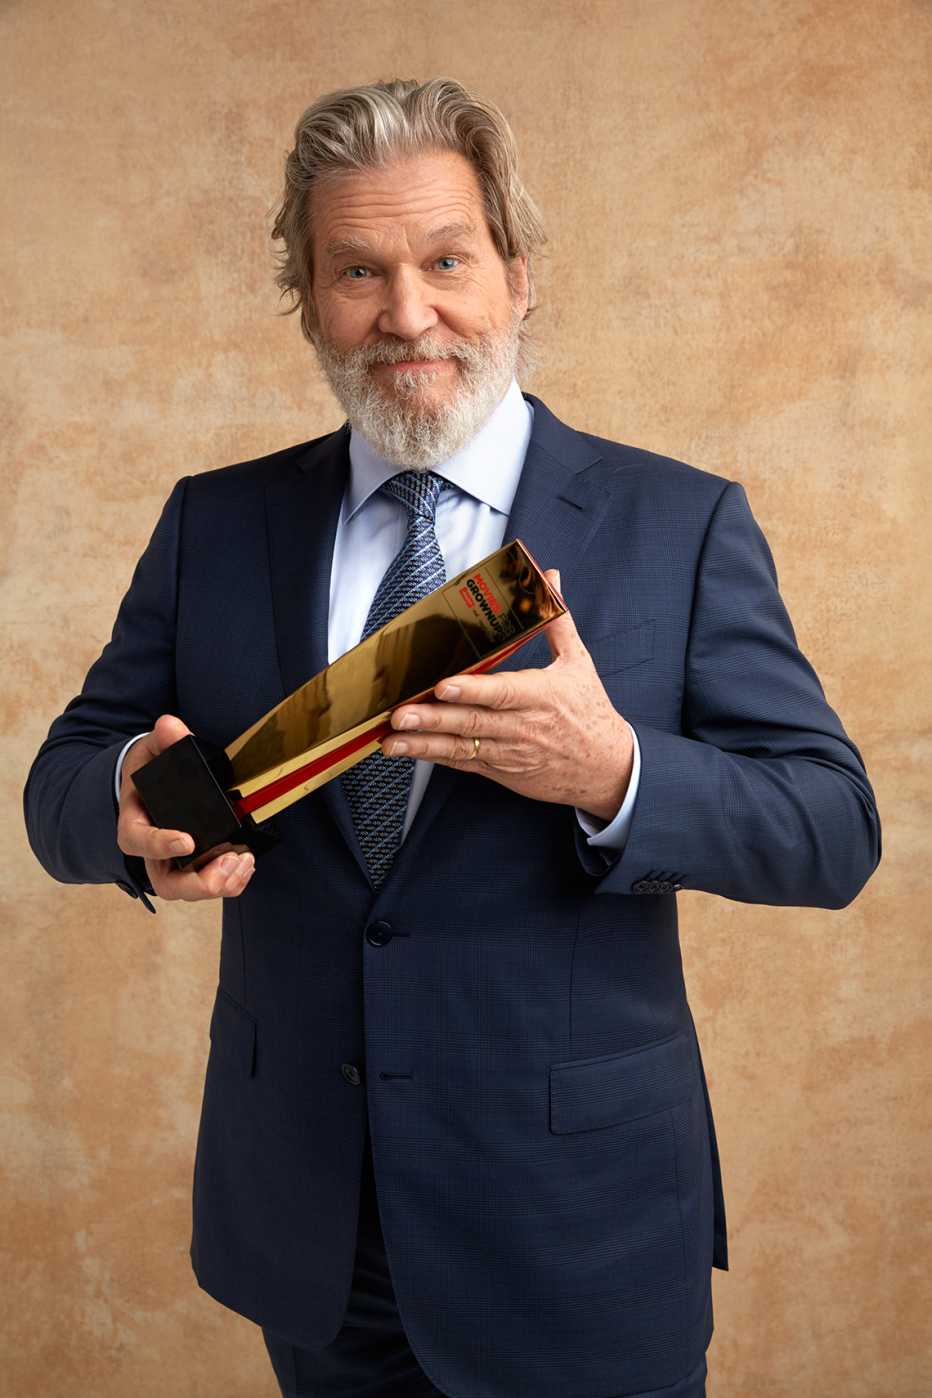 Jeff Bridges at the 16th Annual AARP The Magazine's Movies for Grownups Awards